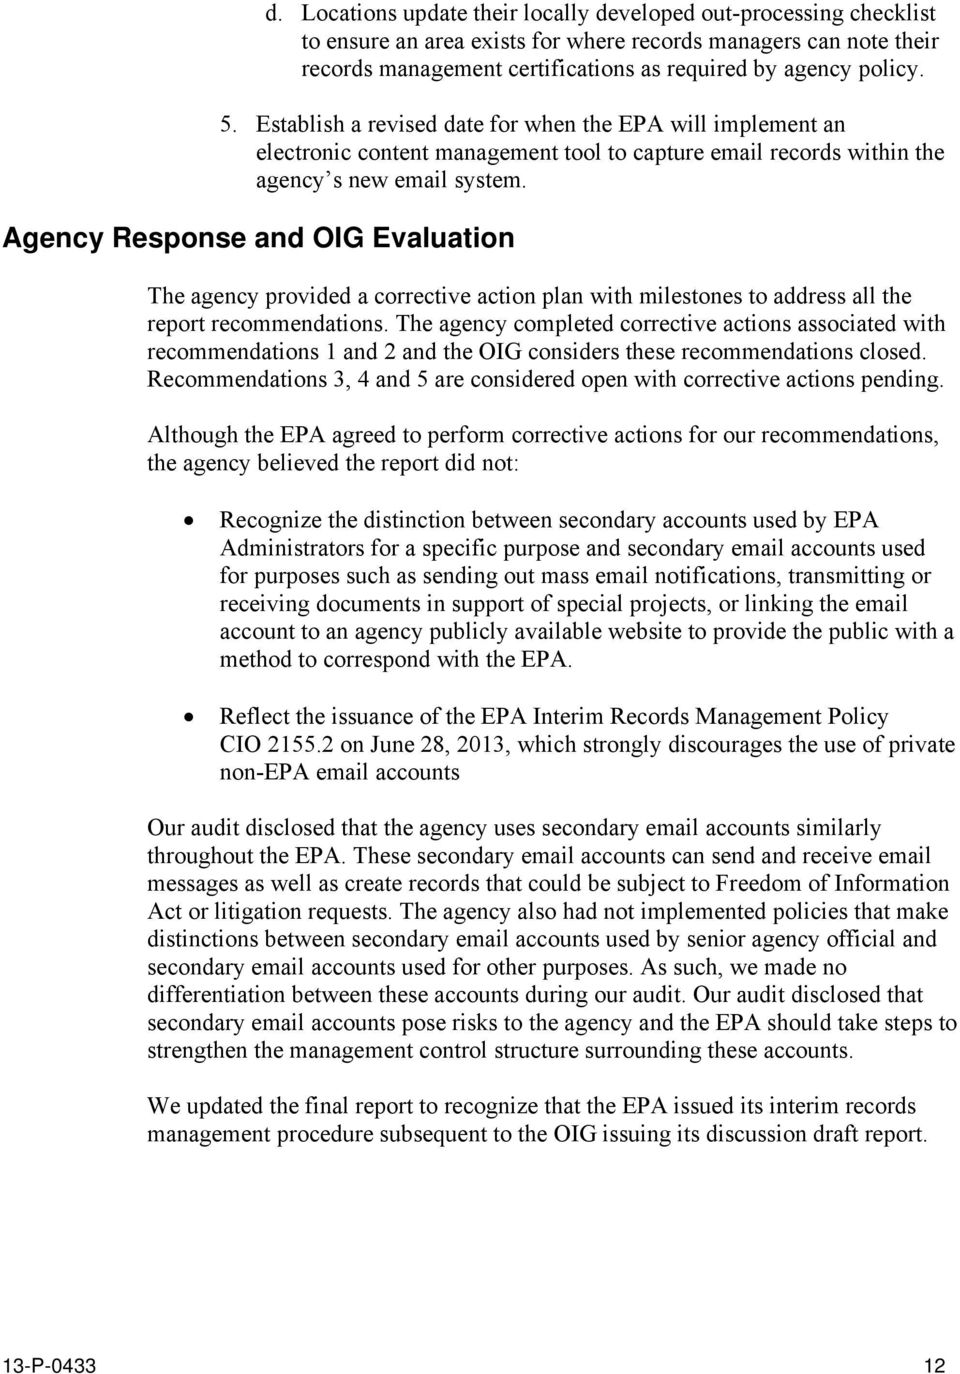 Agency Response and OIG Evaluation The agency provided a corrective action plan with milestones to address all the report recommendations.